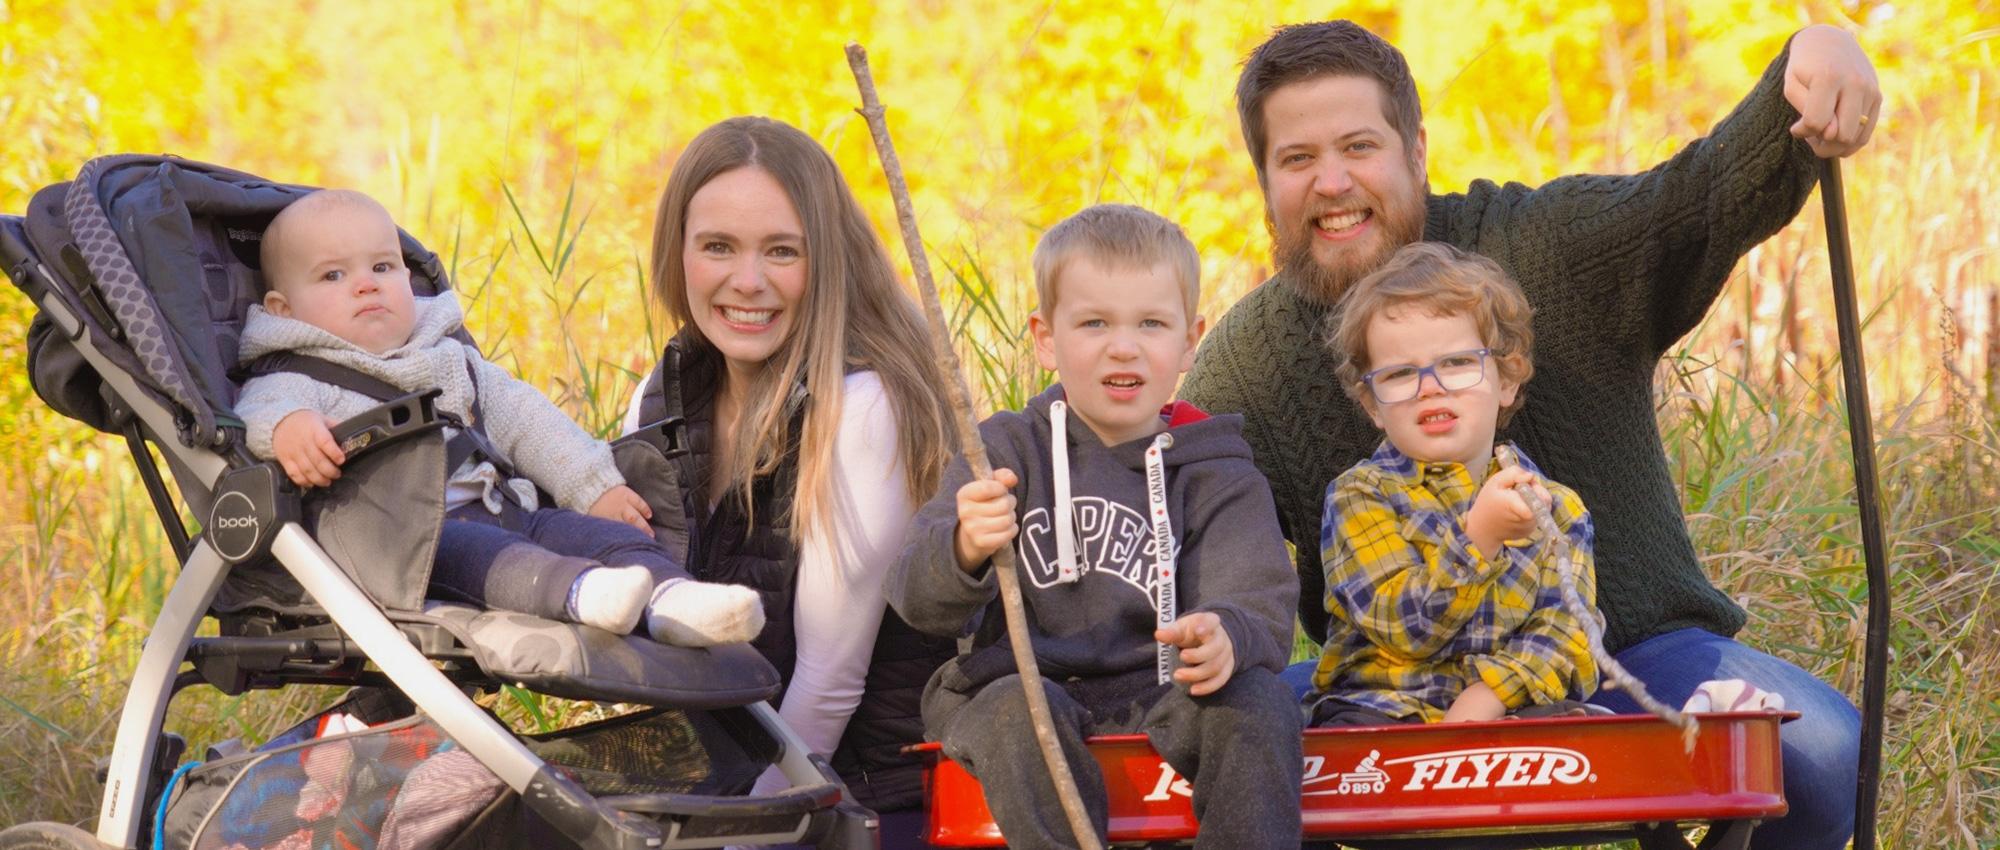 In front of a farm, Lynn Bates and her husband pose with their toddlers in a cart, and their 18-month-old in his trolley.